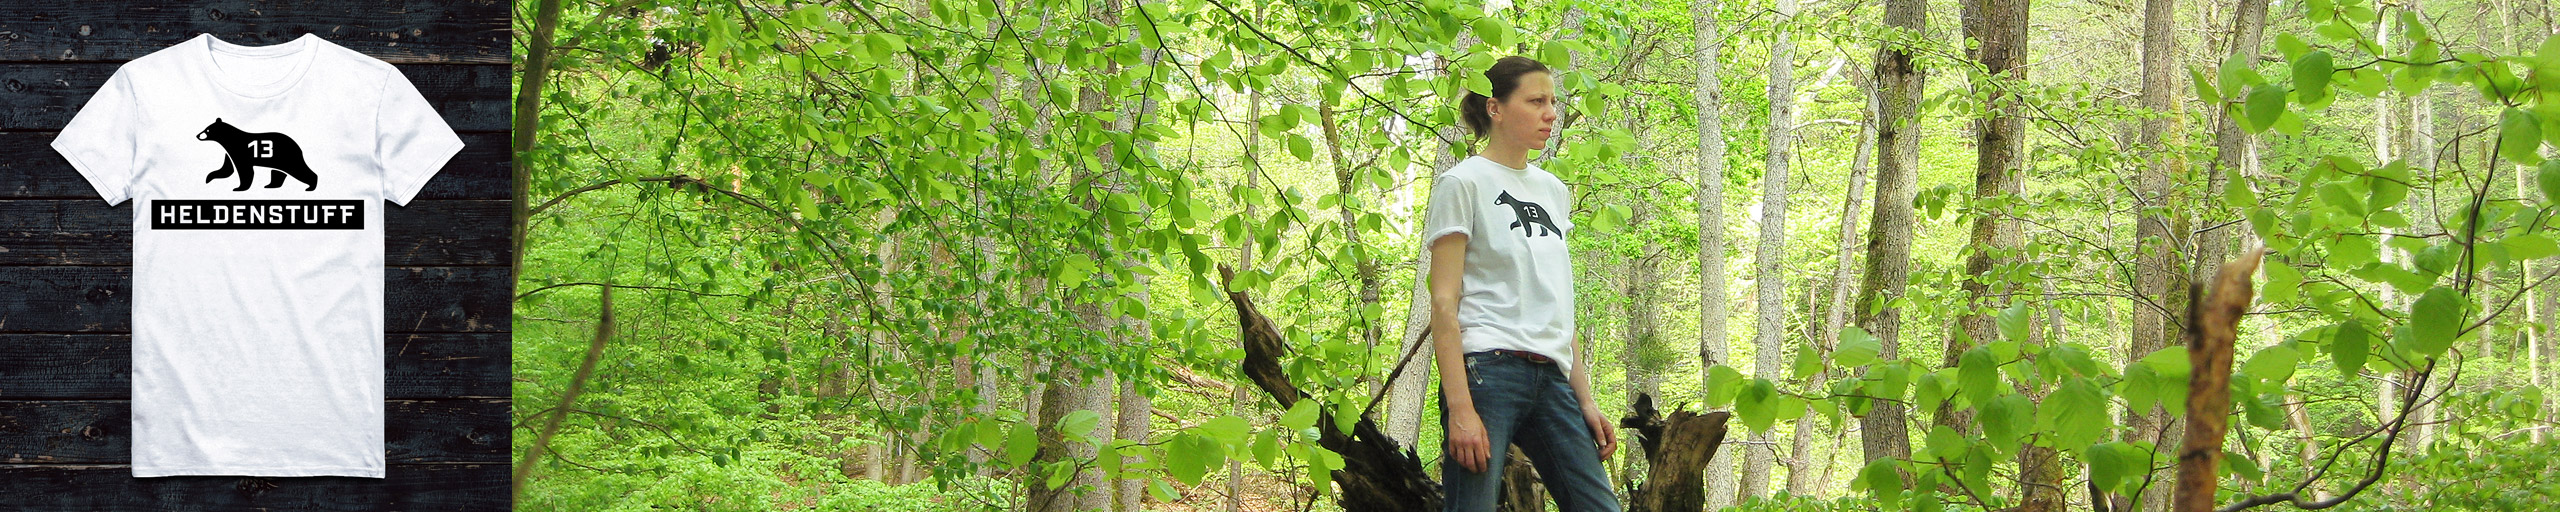 A woman wearing a heldenstuff logo T-shirt in the forest.